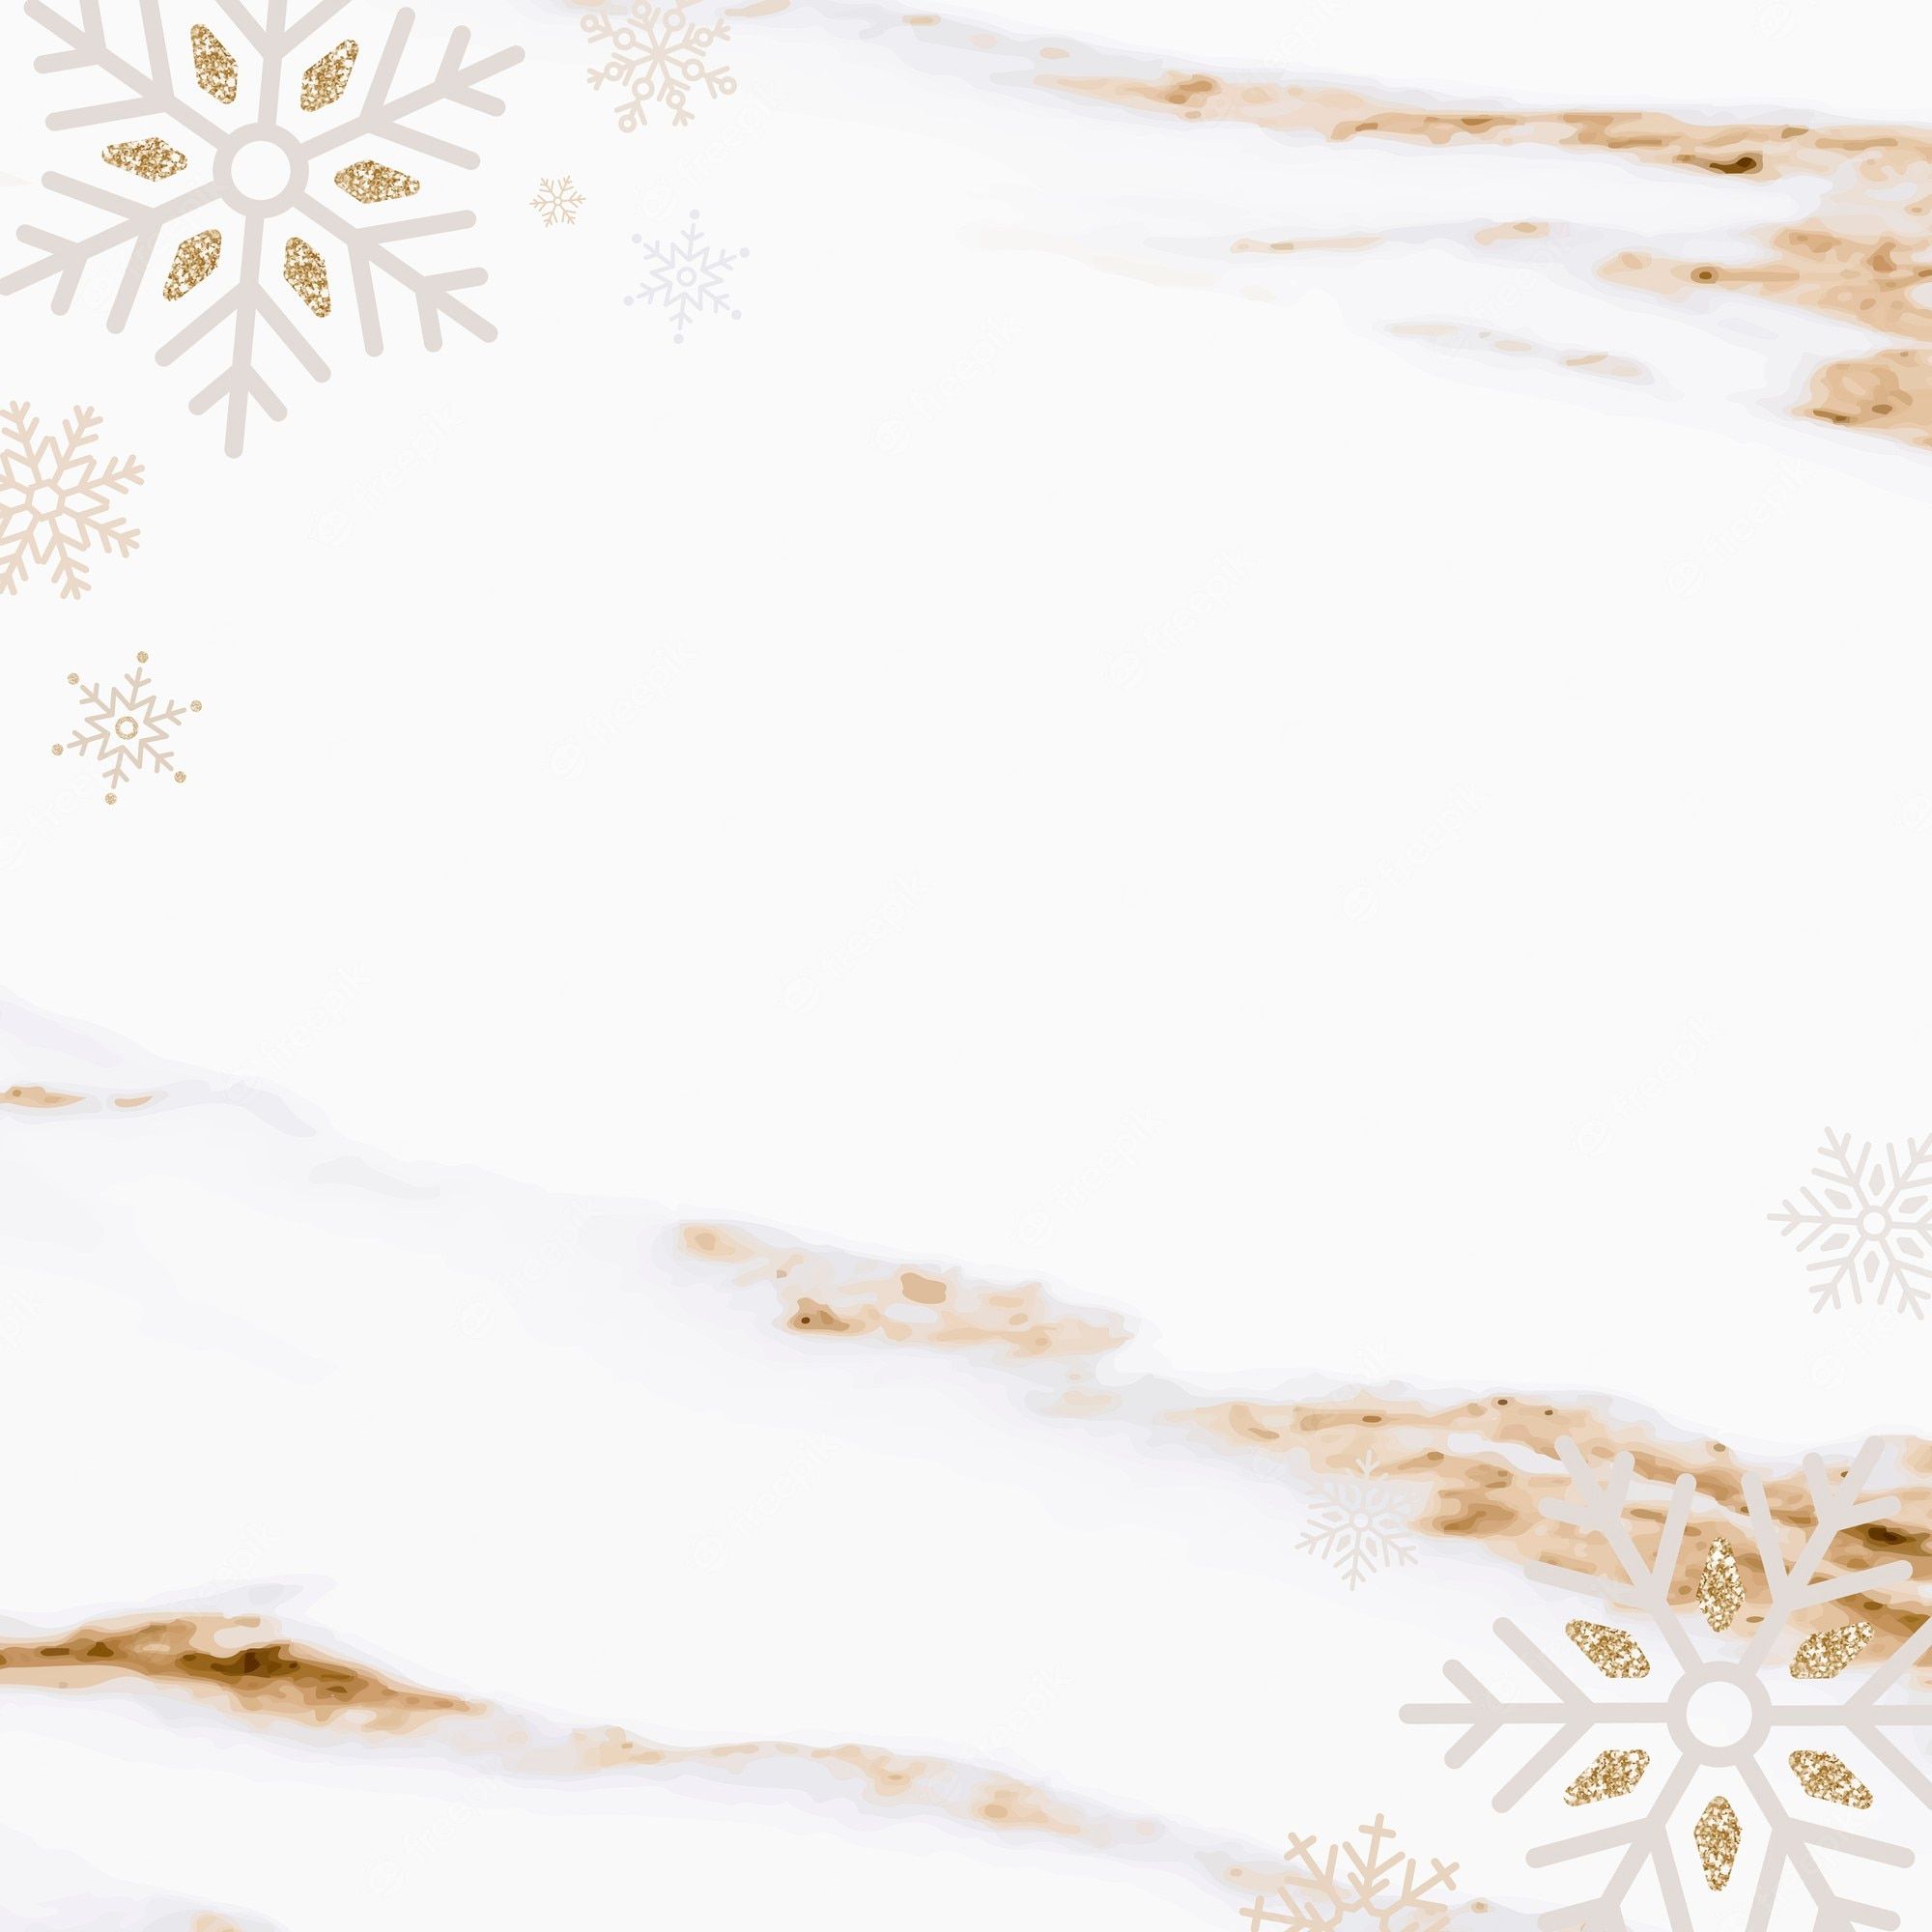 Christmas wallpaper white Vectors & Illustrations for Free Download